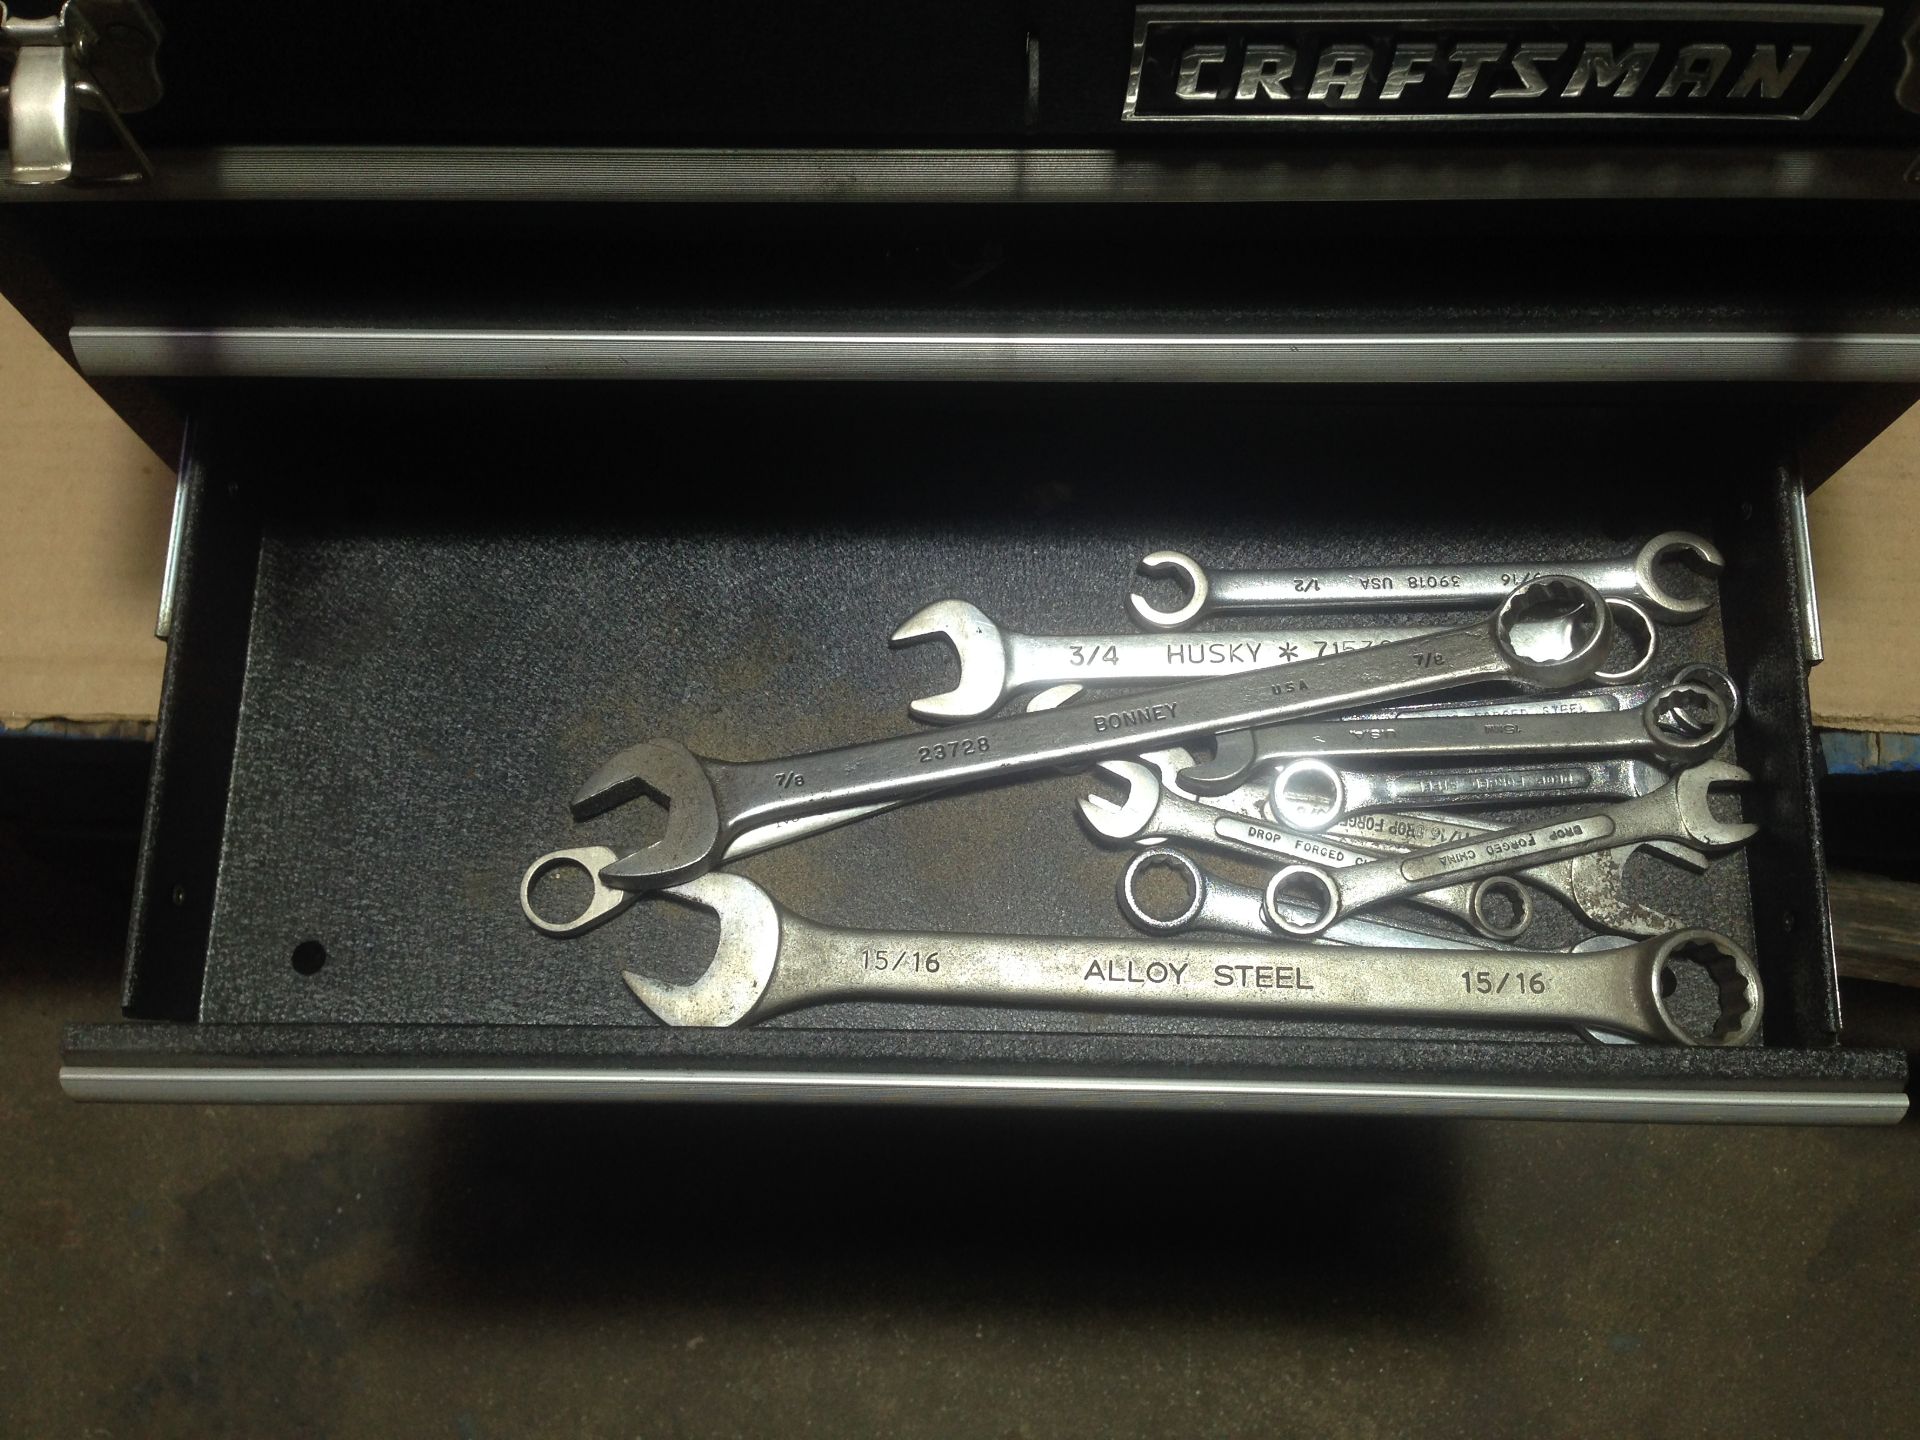 LOT - CRAFTSMAN 4-DRAWER TOOL BOX, W/ CONTENTS TO INCLUDE: WRENCHES, SCREWDRIVERS, ETC. - Image 5 of 5